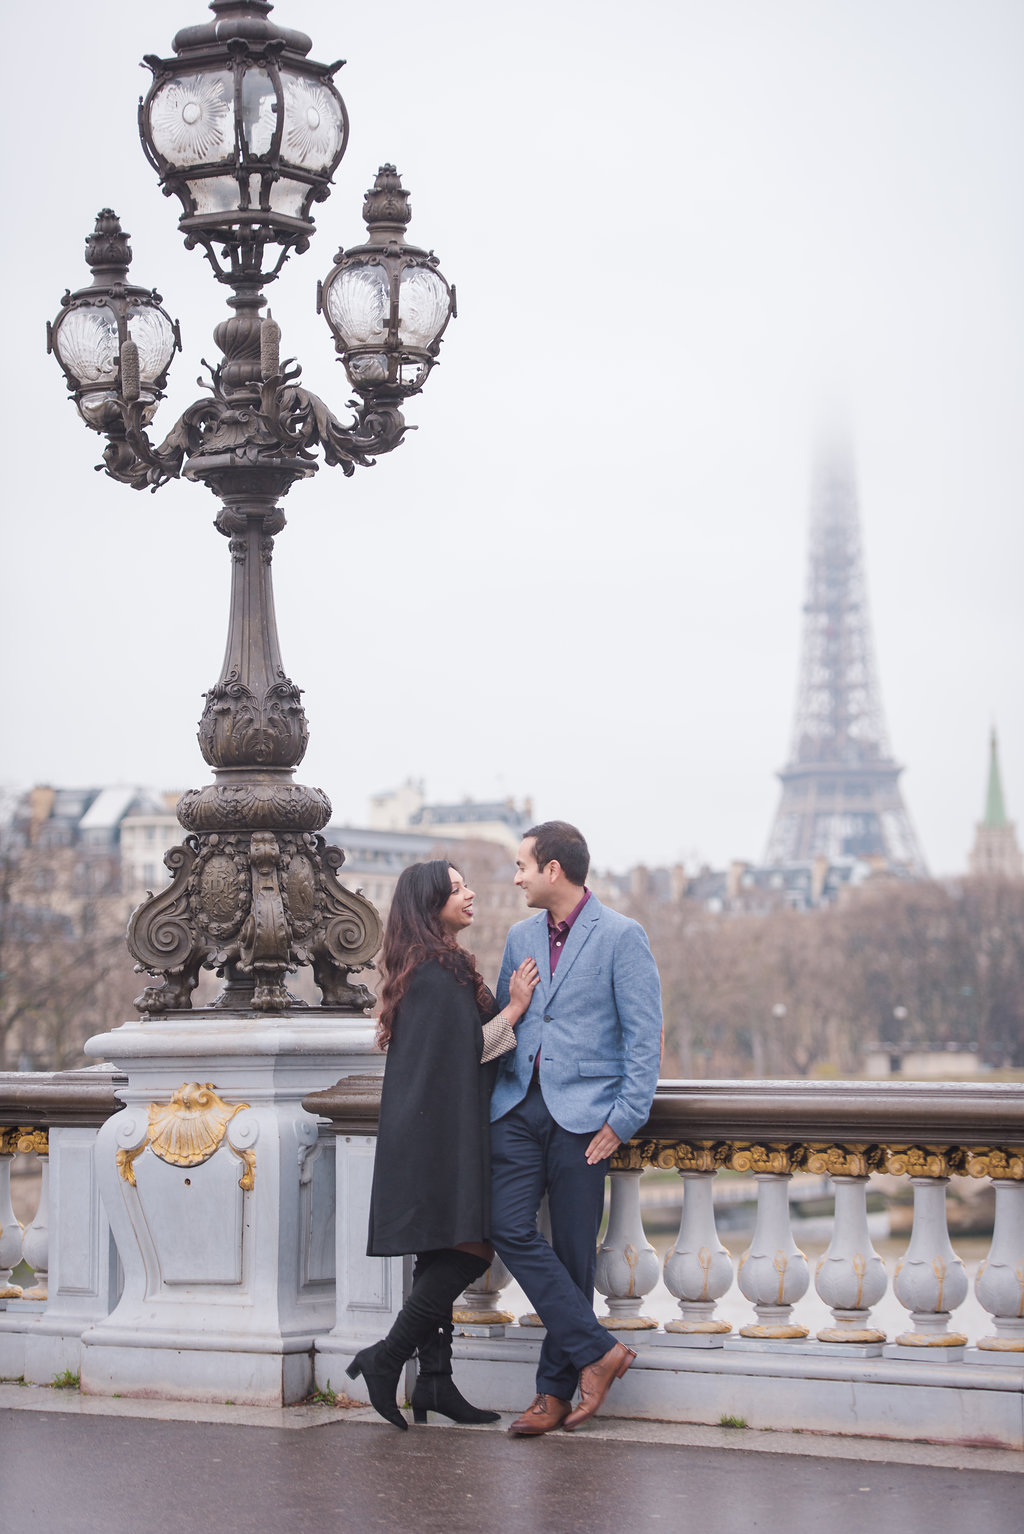 Surprise Proposal at Pont Alexandre III - with violinist! - Pictours ...